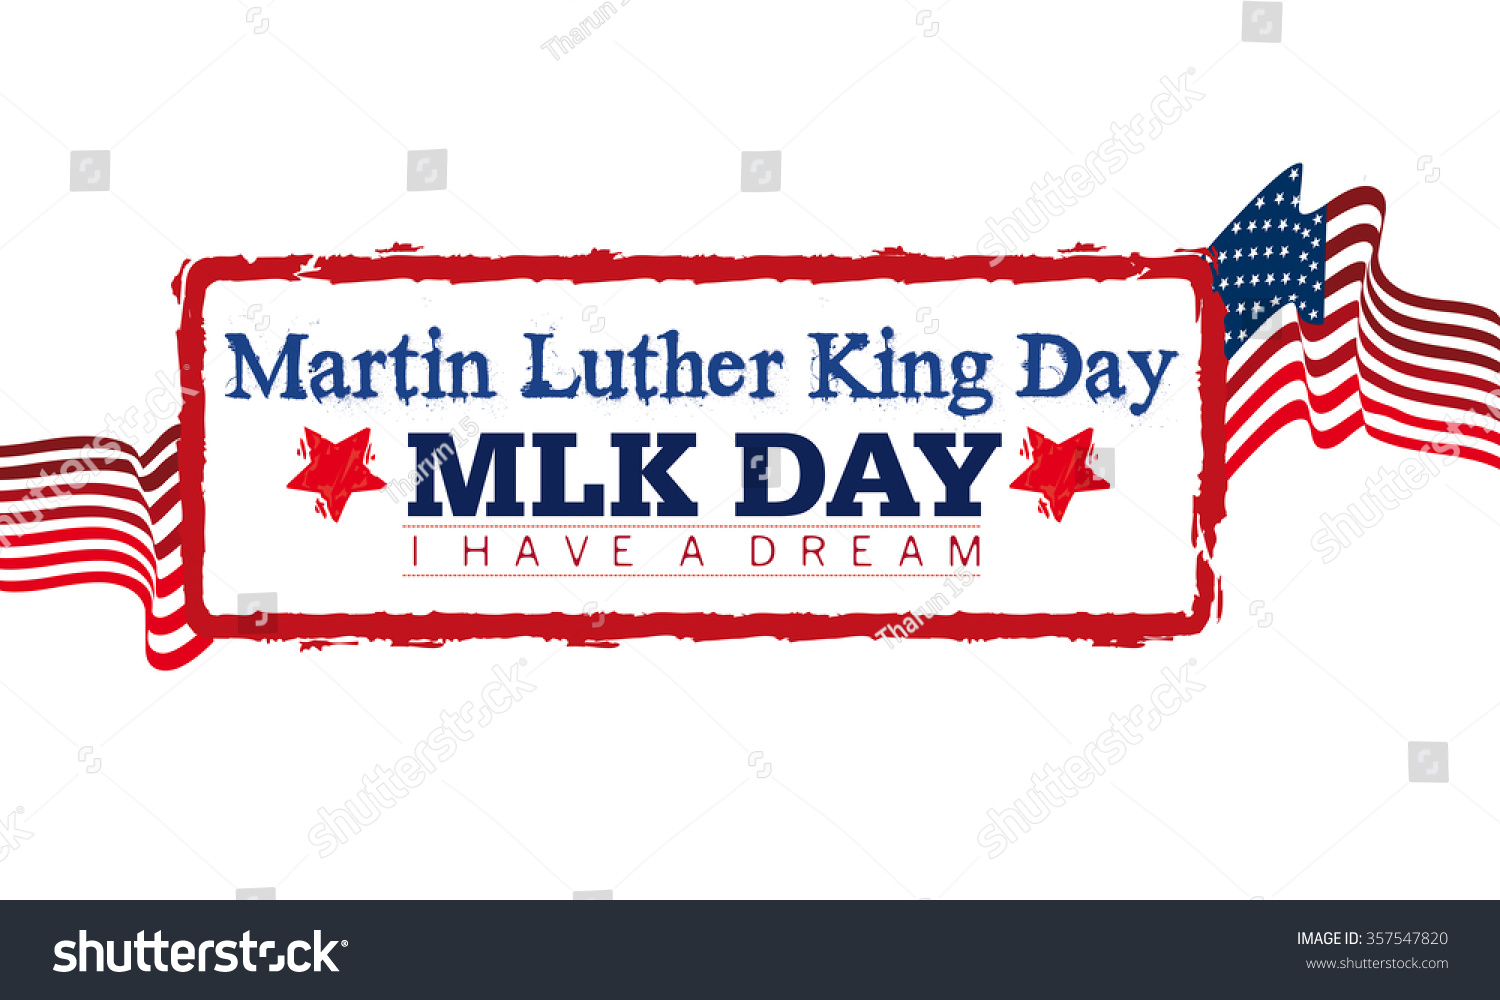 Martin Luther King Day Stock Photo 357547820 : Shutterstock